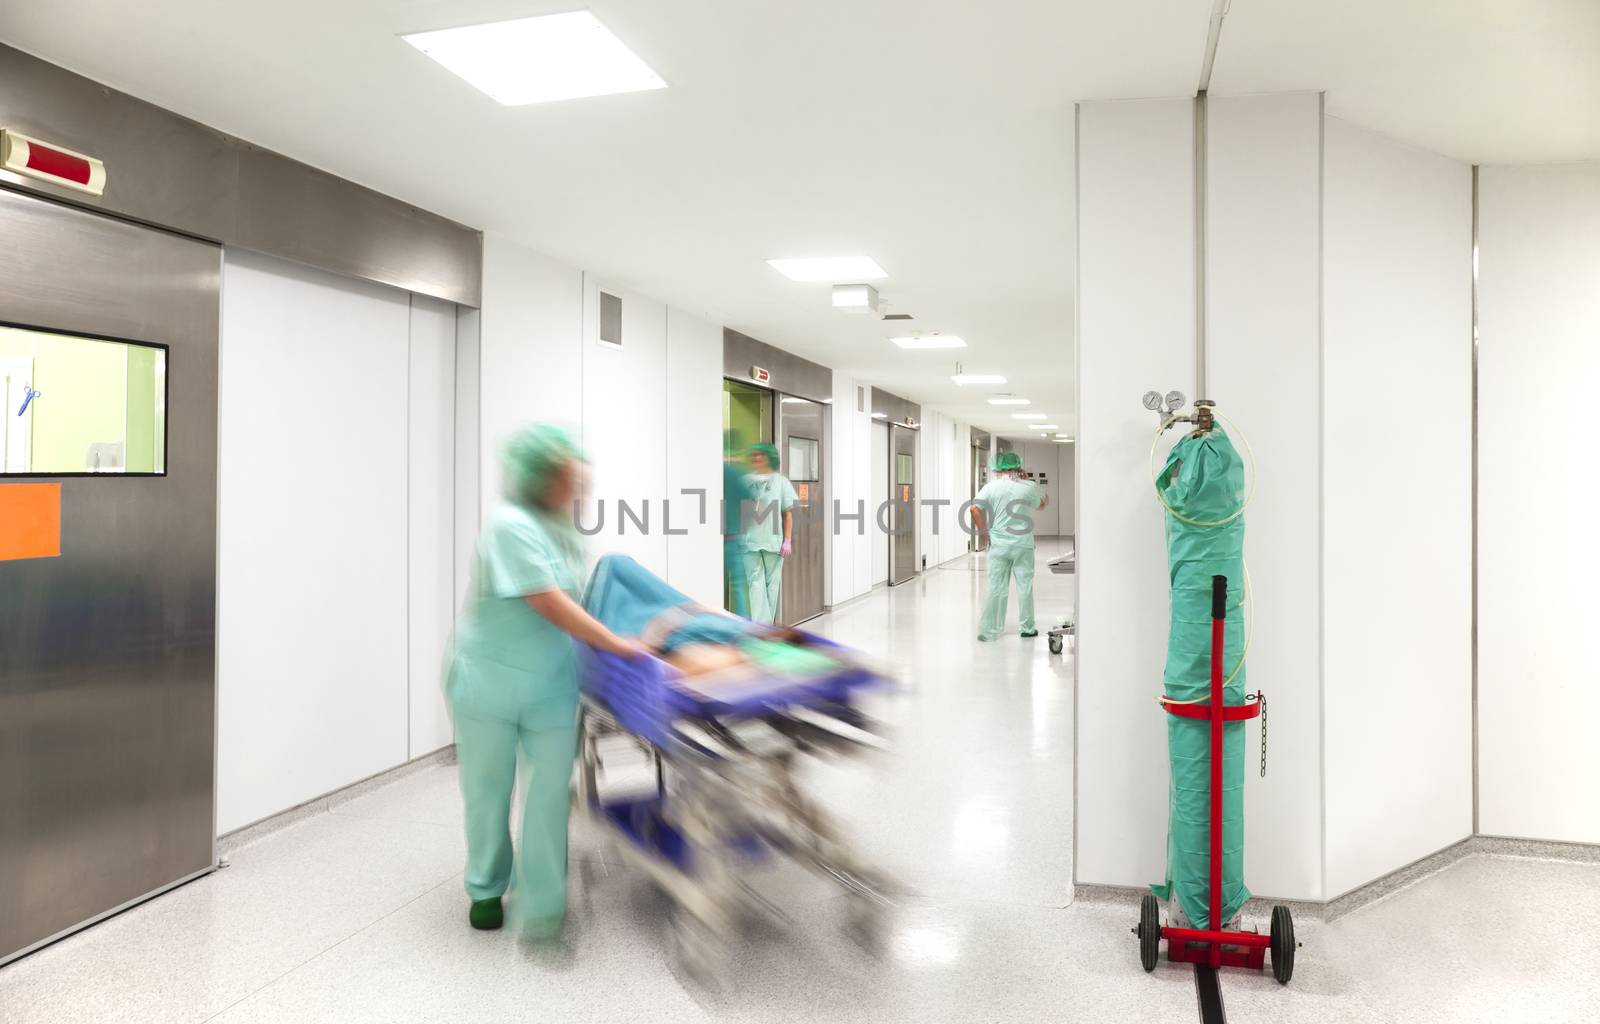 Modern hospital surgery corridor with motion blurred figures of personnel wearing medical uniforms with an emergency bed on wheels.